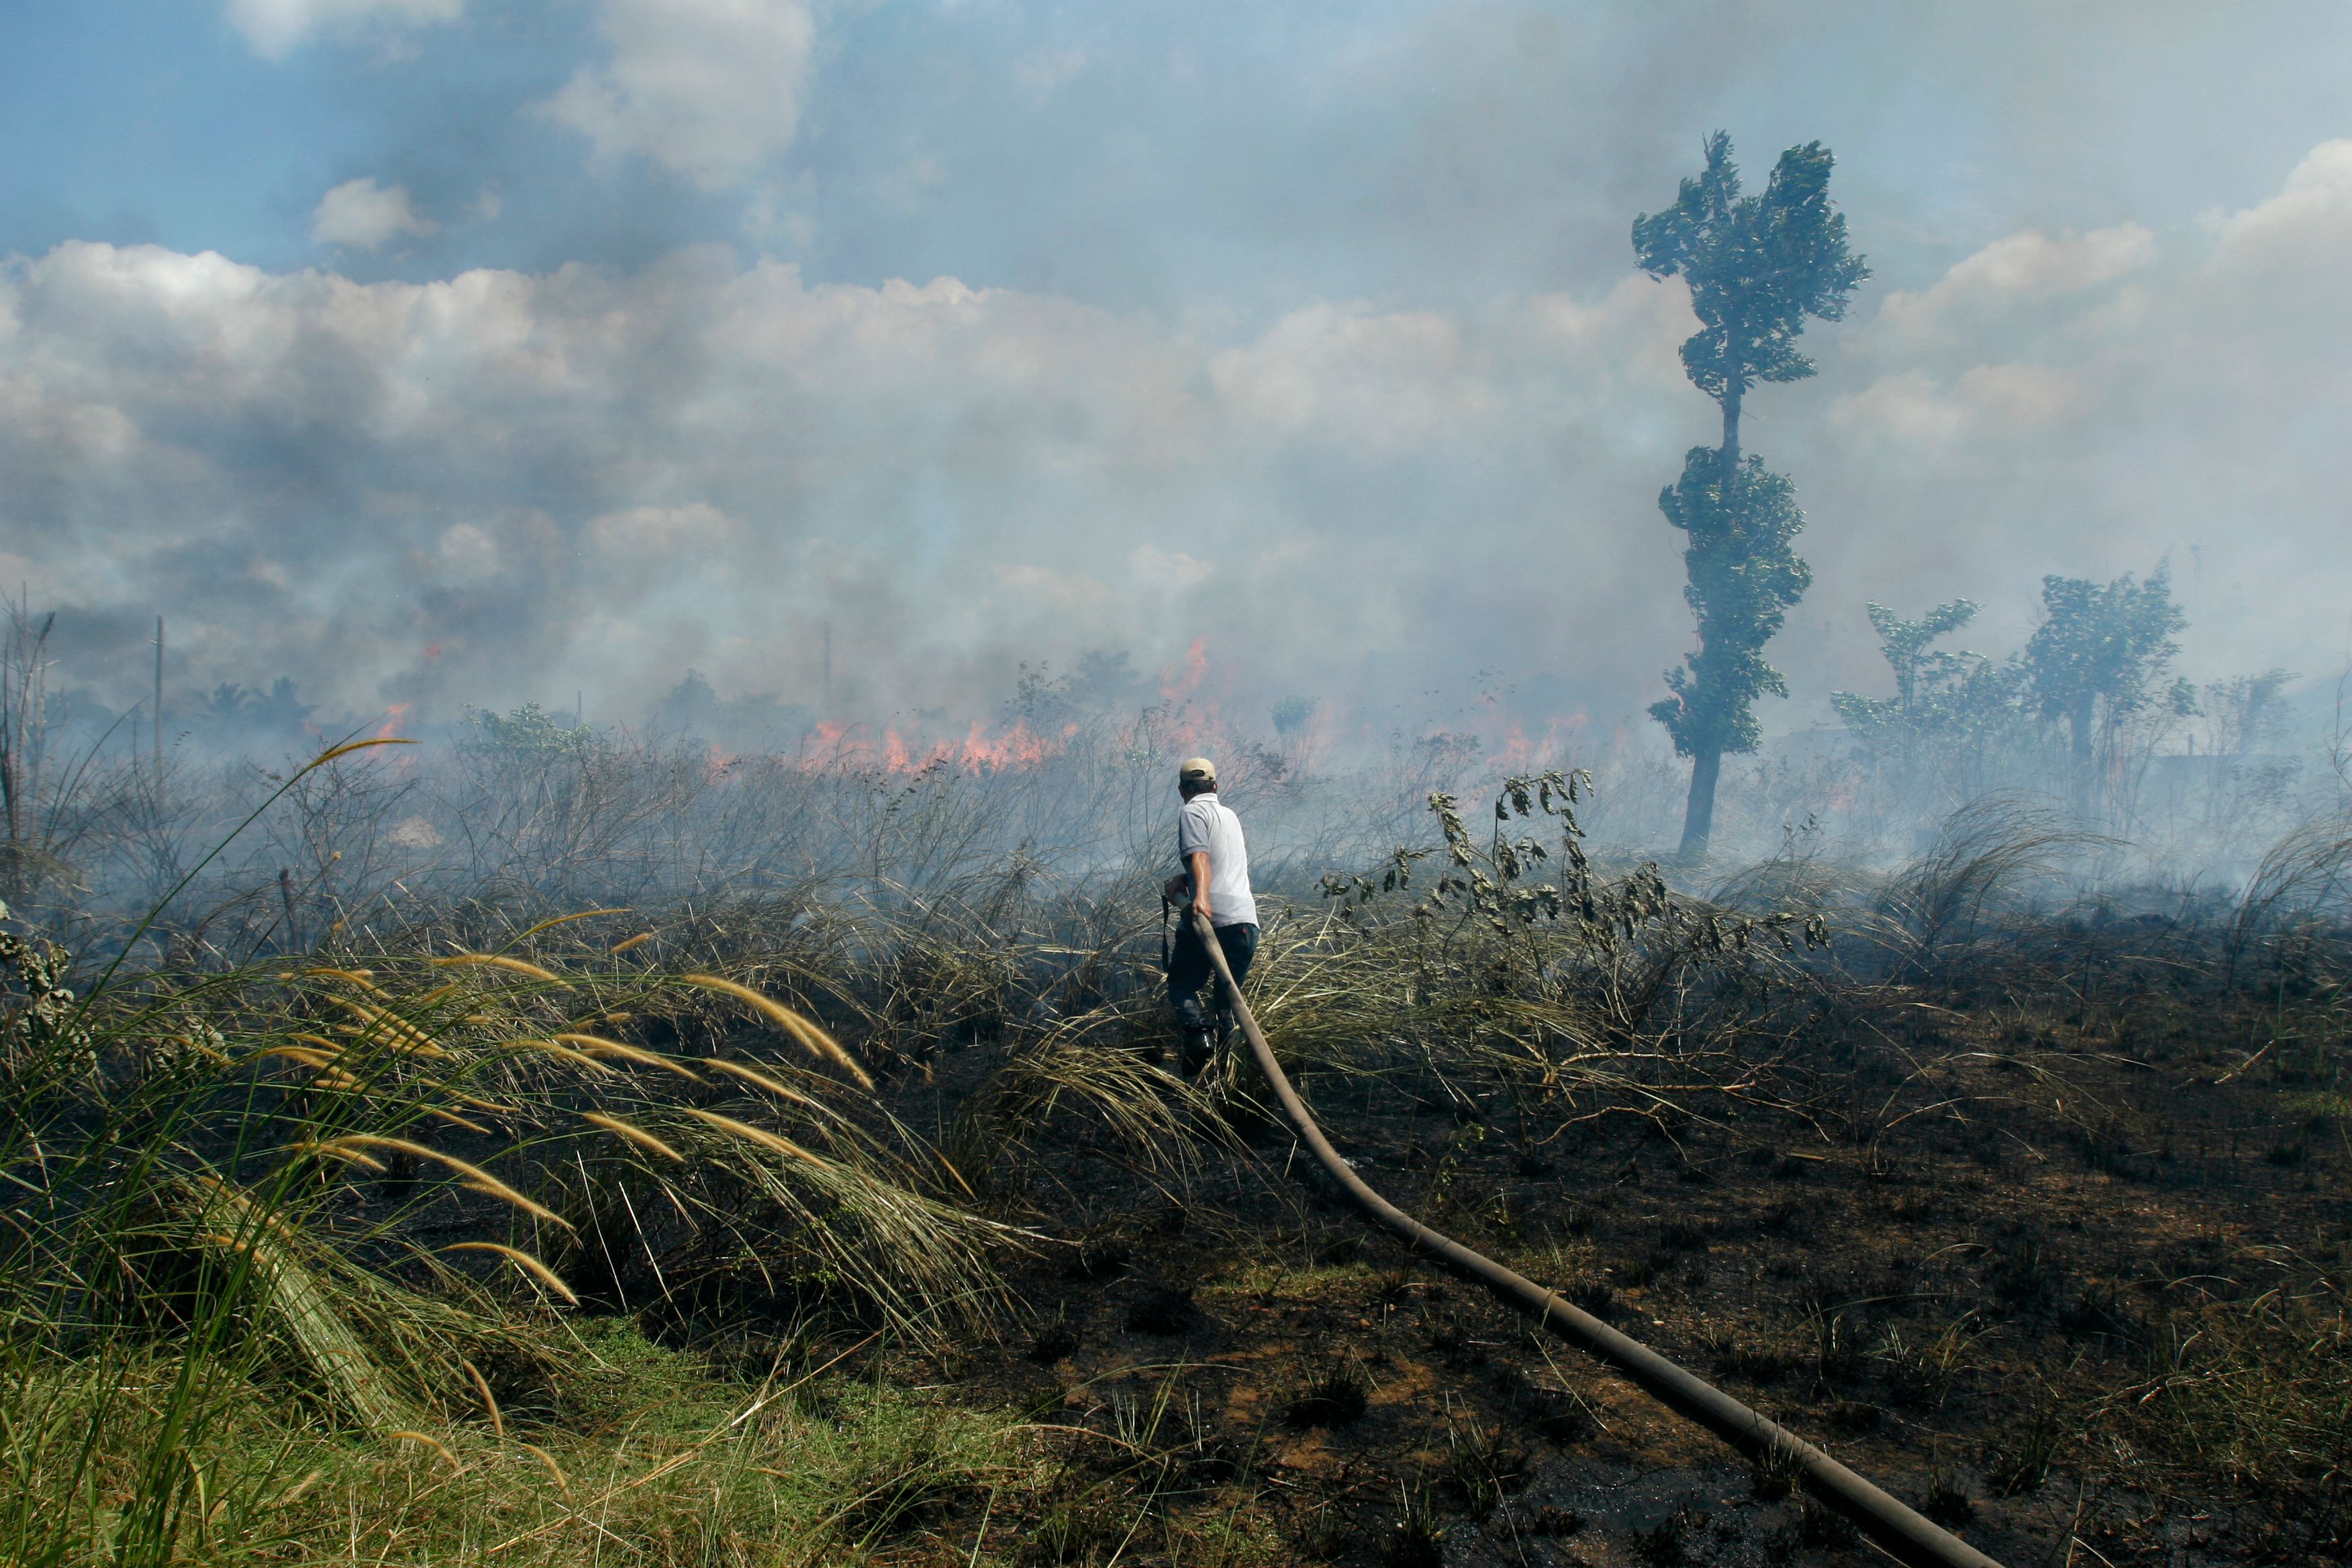 Firefighters are near smoke from forest fires in dry tropical forests, South Kalimantan, Borneo, Indonesia. Image by donny sophandi/Shutterstock. Indonesia, undated.